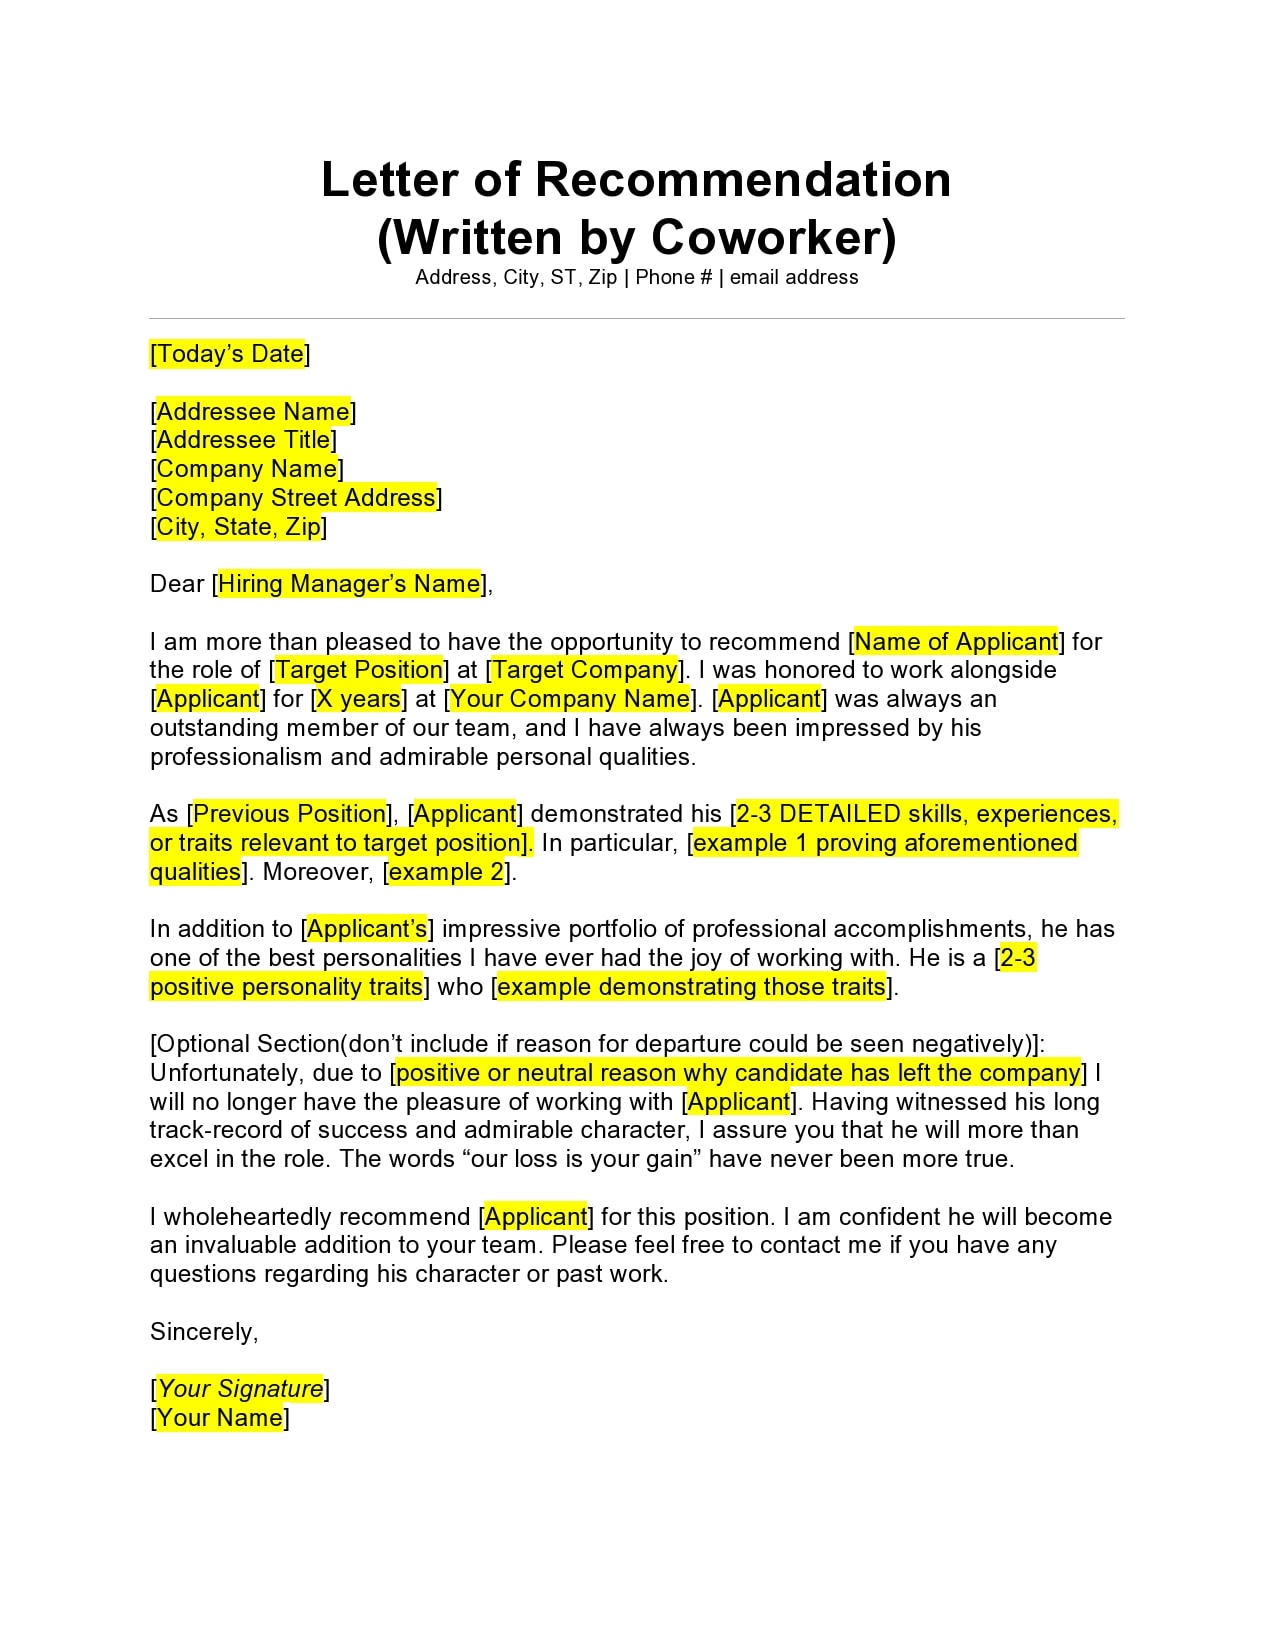 free-sample-letter-of-recommendation-for-coworker-letter-templates